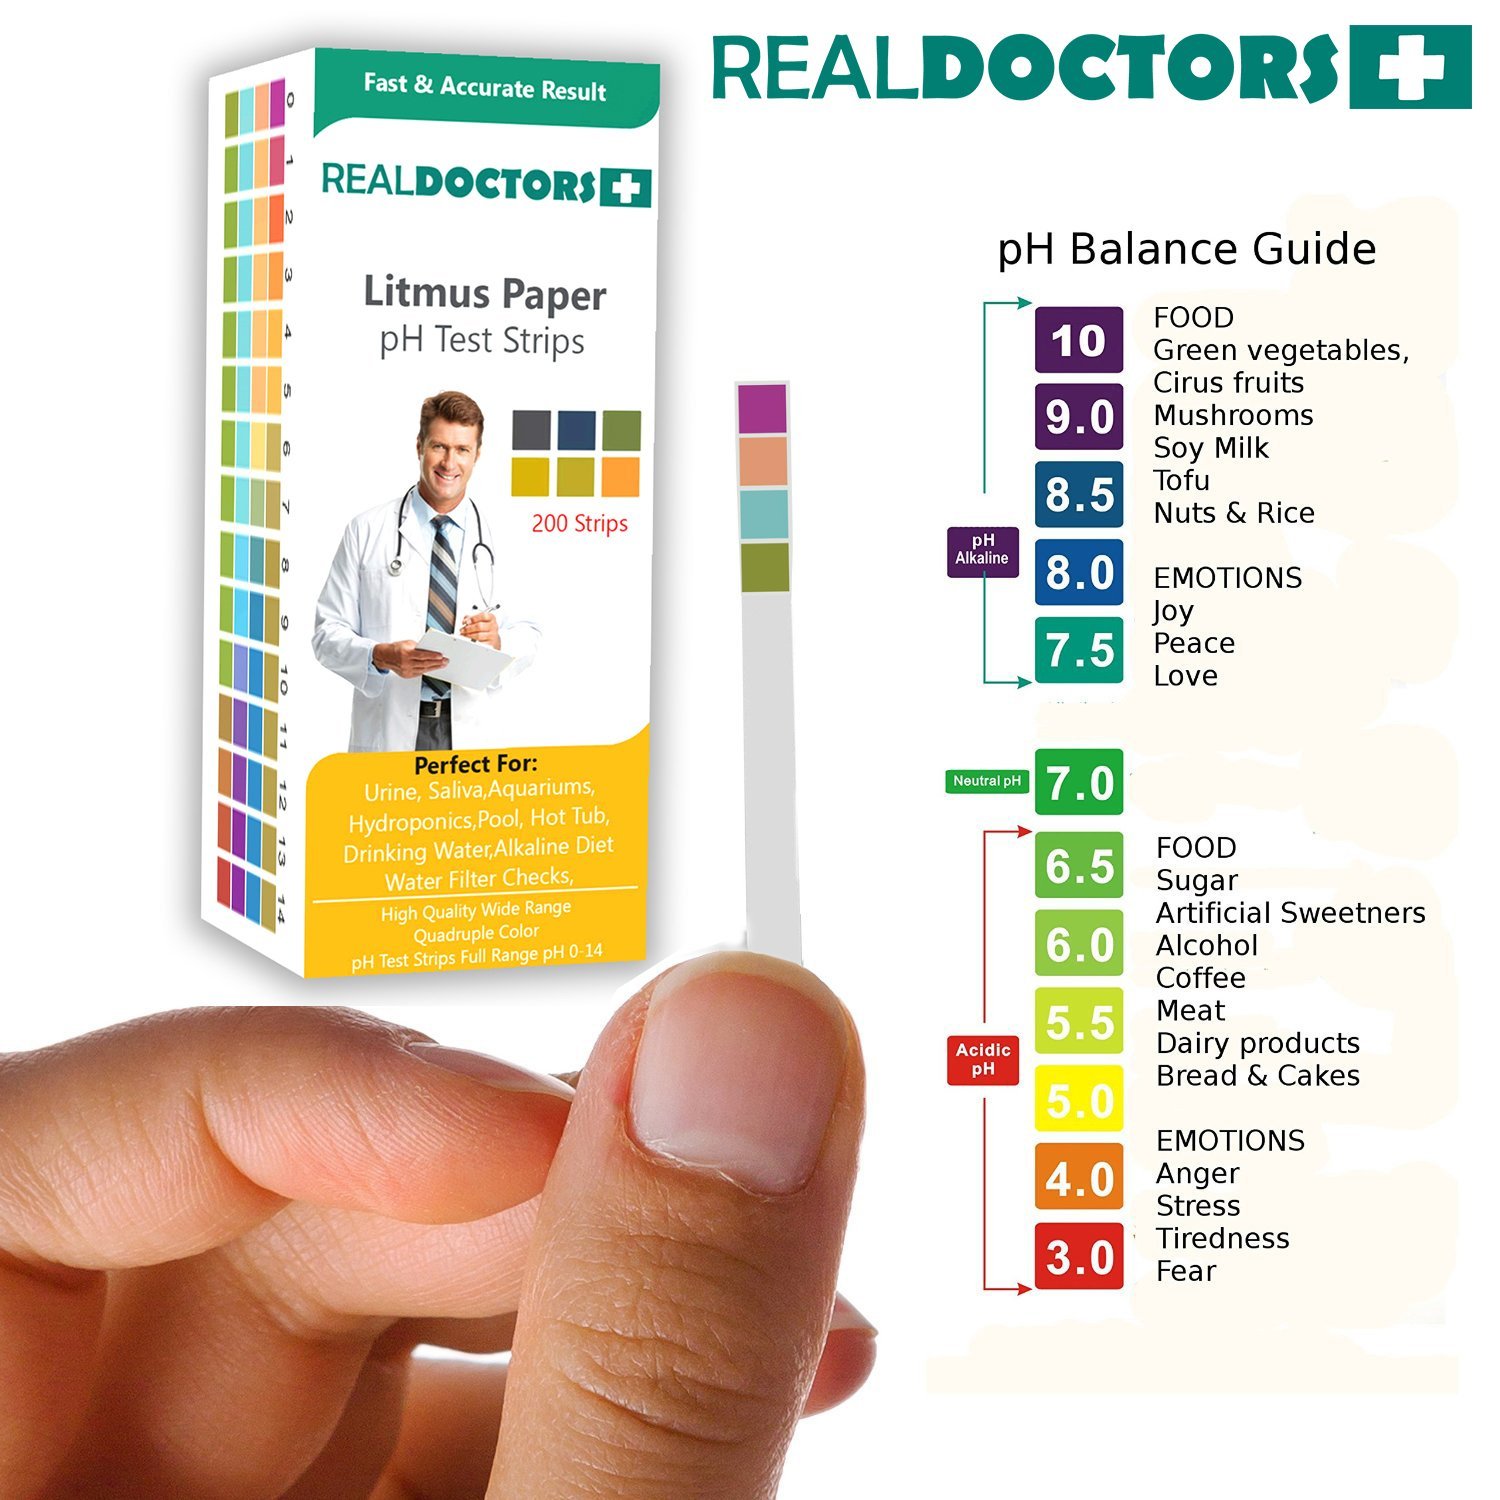 Amazon.com: Real Doctors Litmus Paper pH Test Strip with eBook, 200 ...